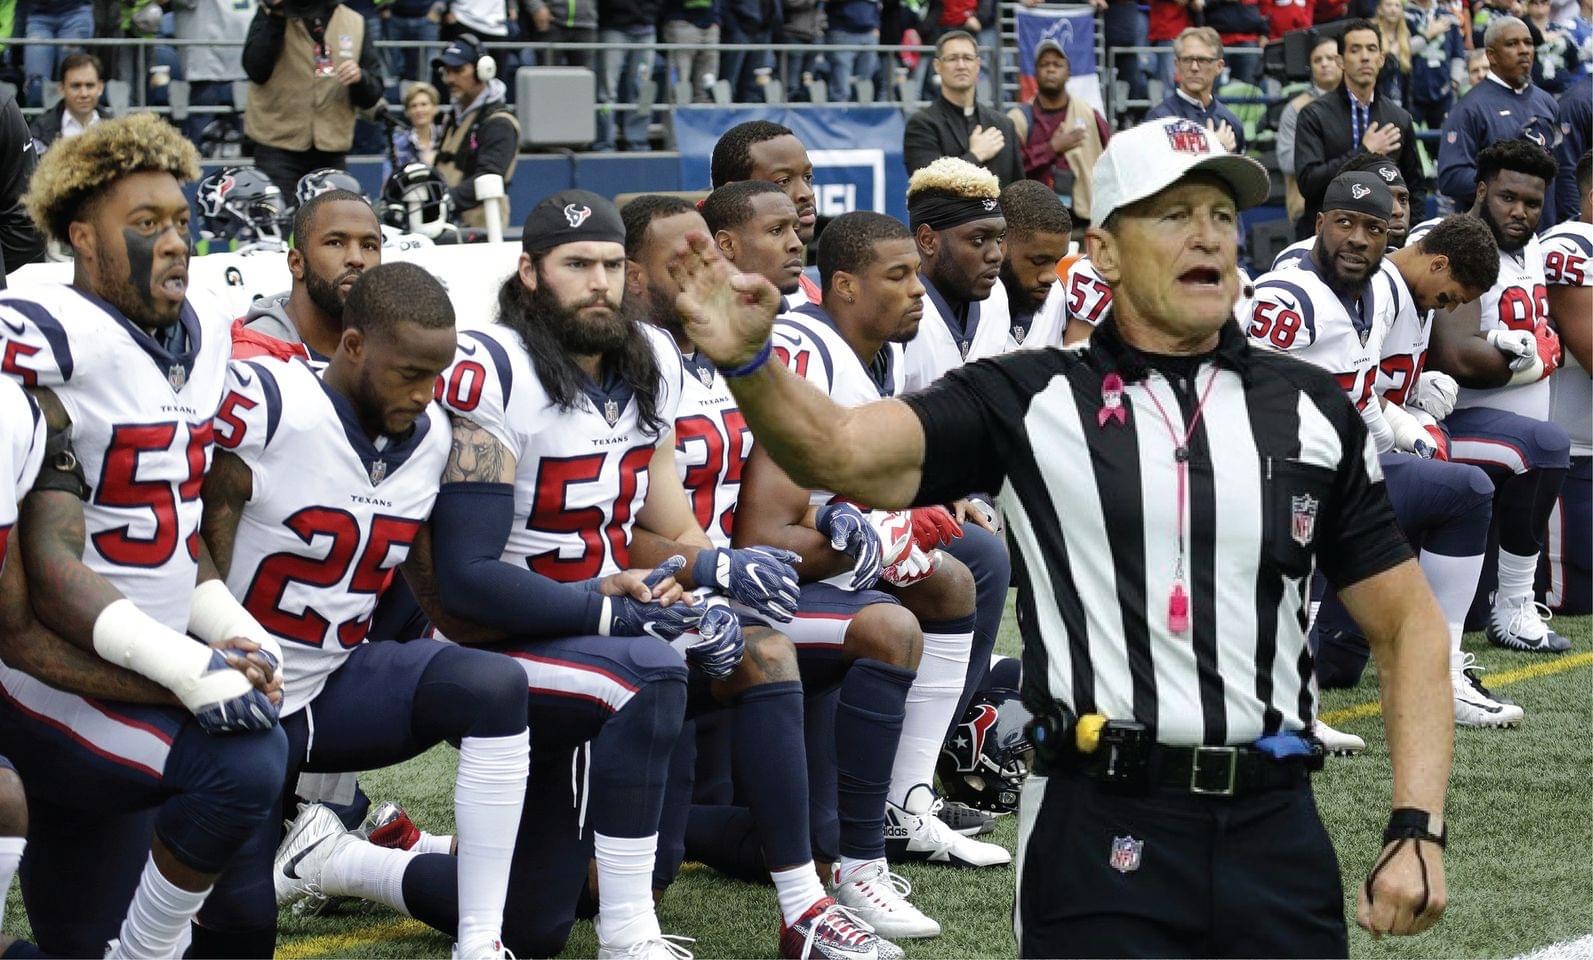 “NFL Referees Make Controversial Call: 10 Players Disqualified for Anthem Kneeling!”